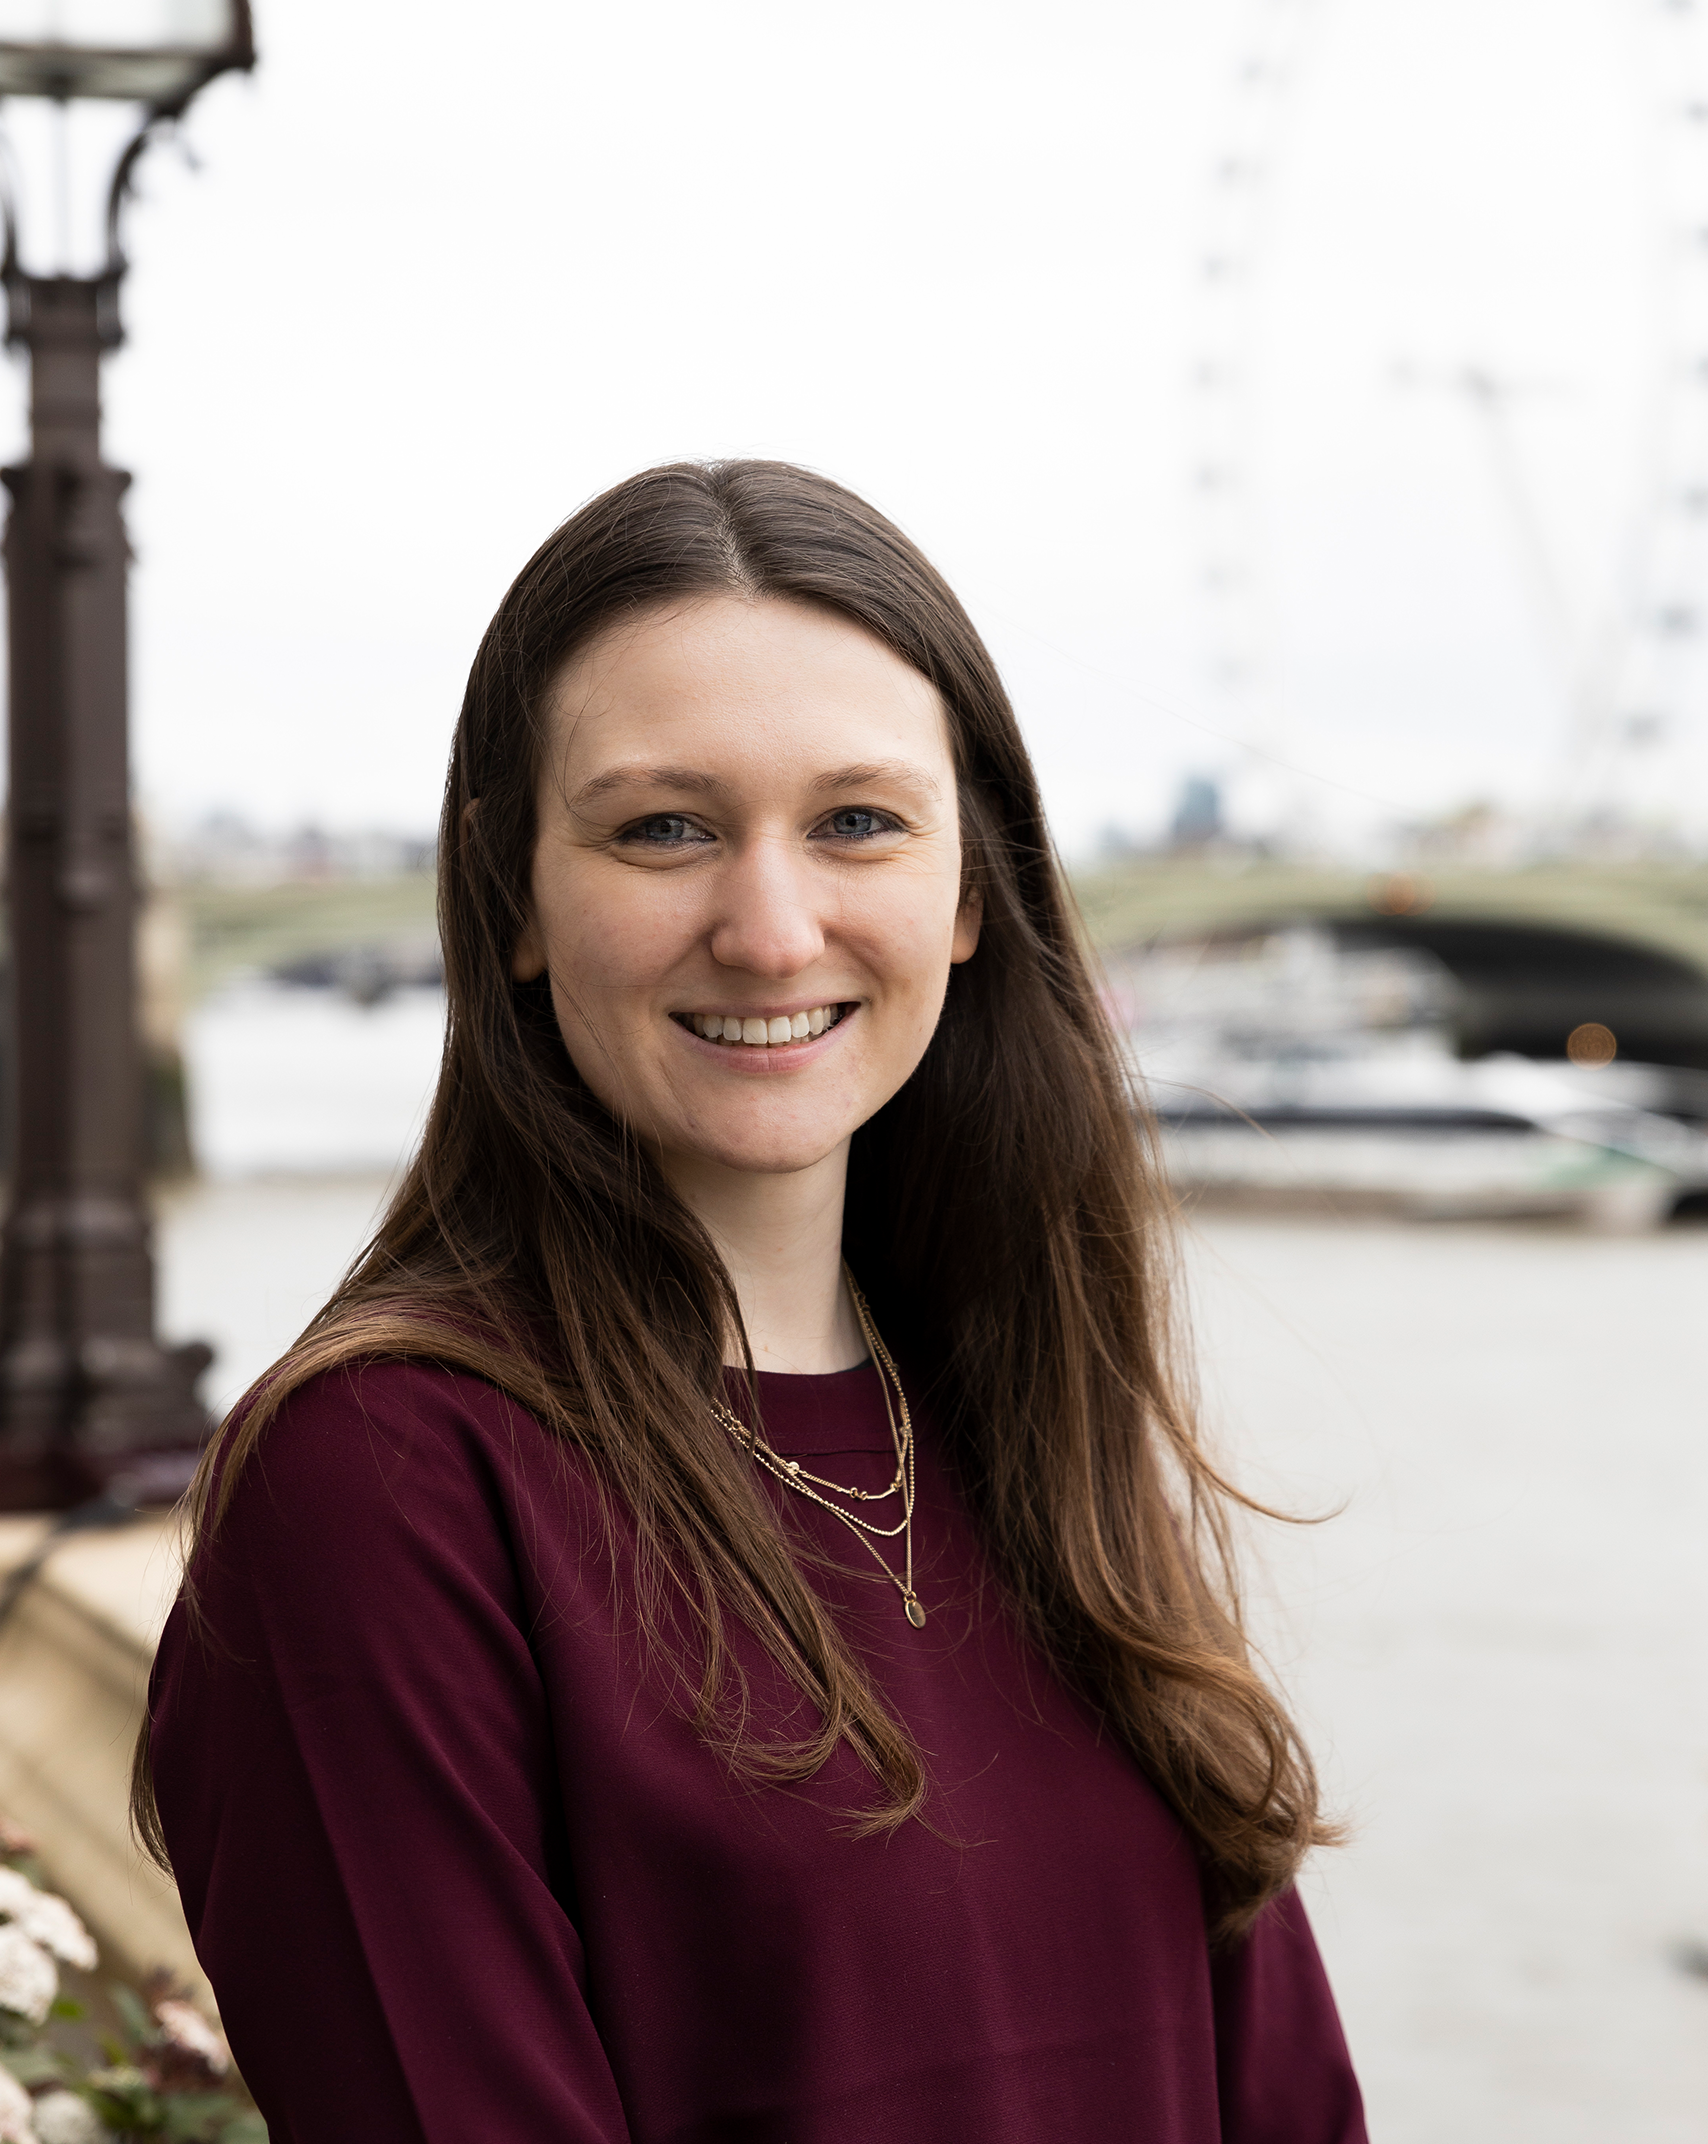 A headshot of Sophie, Genetic Alliance UK's Policy team. She has long brown hair and smiles with a friendly smile. She stands by the Thames river at the Westminster Parliament building.